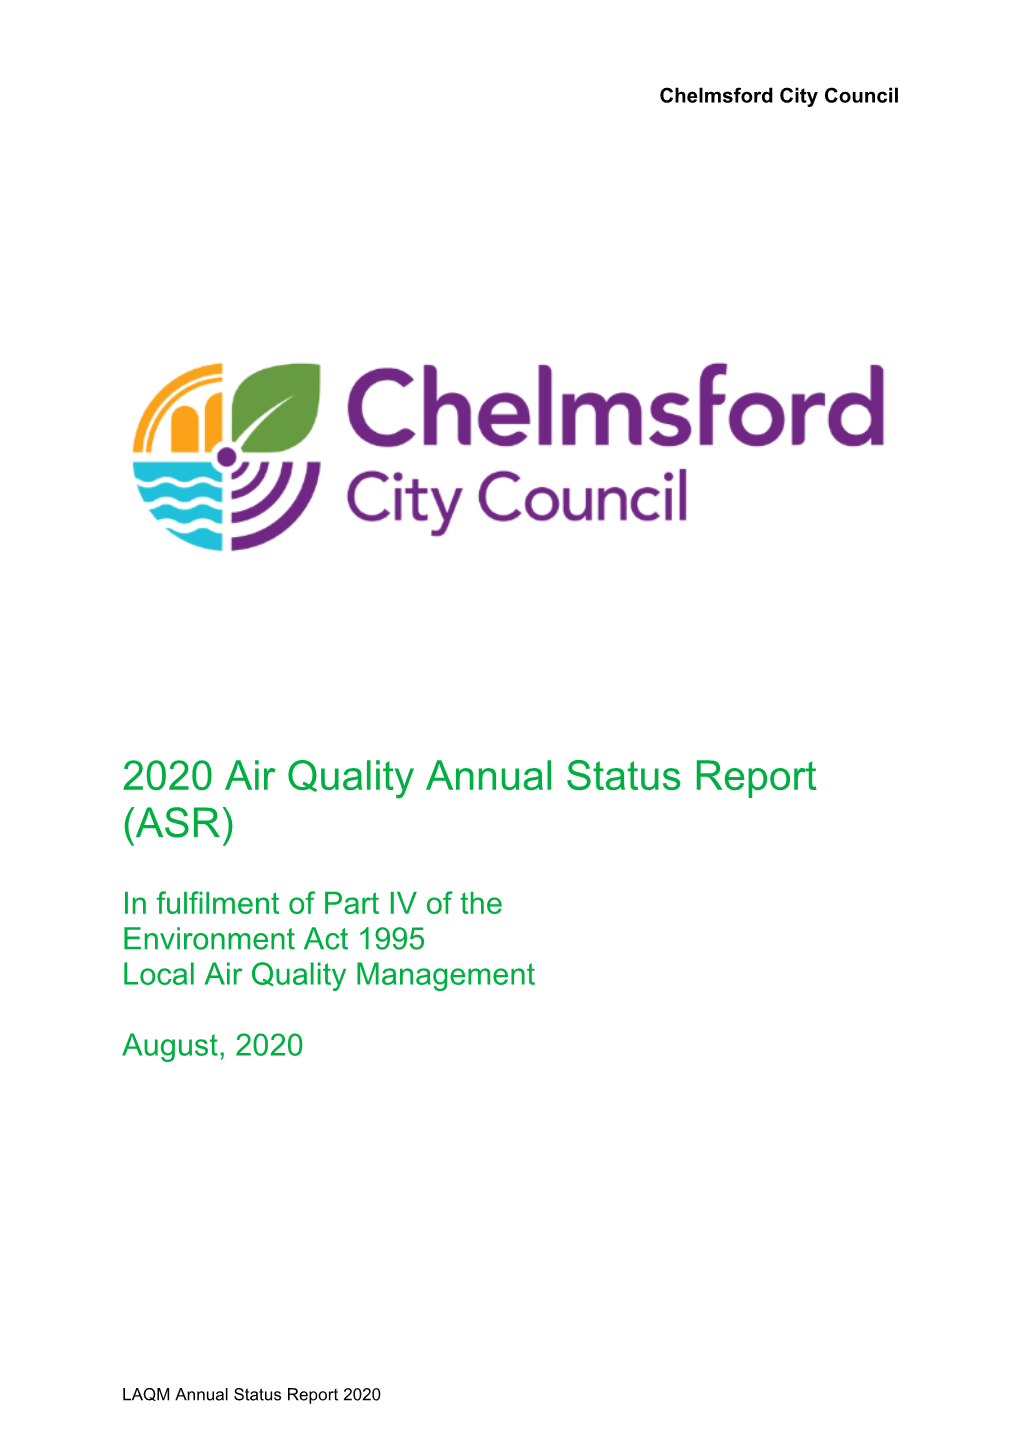 Chelmsford City Council 2020